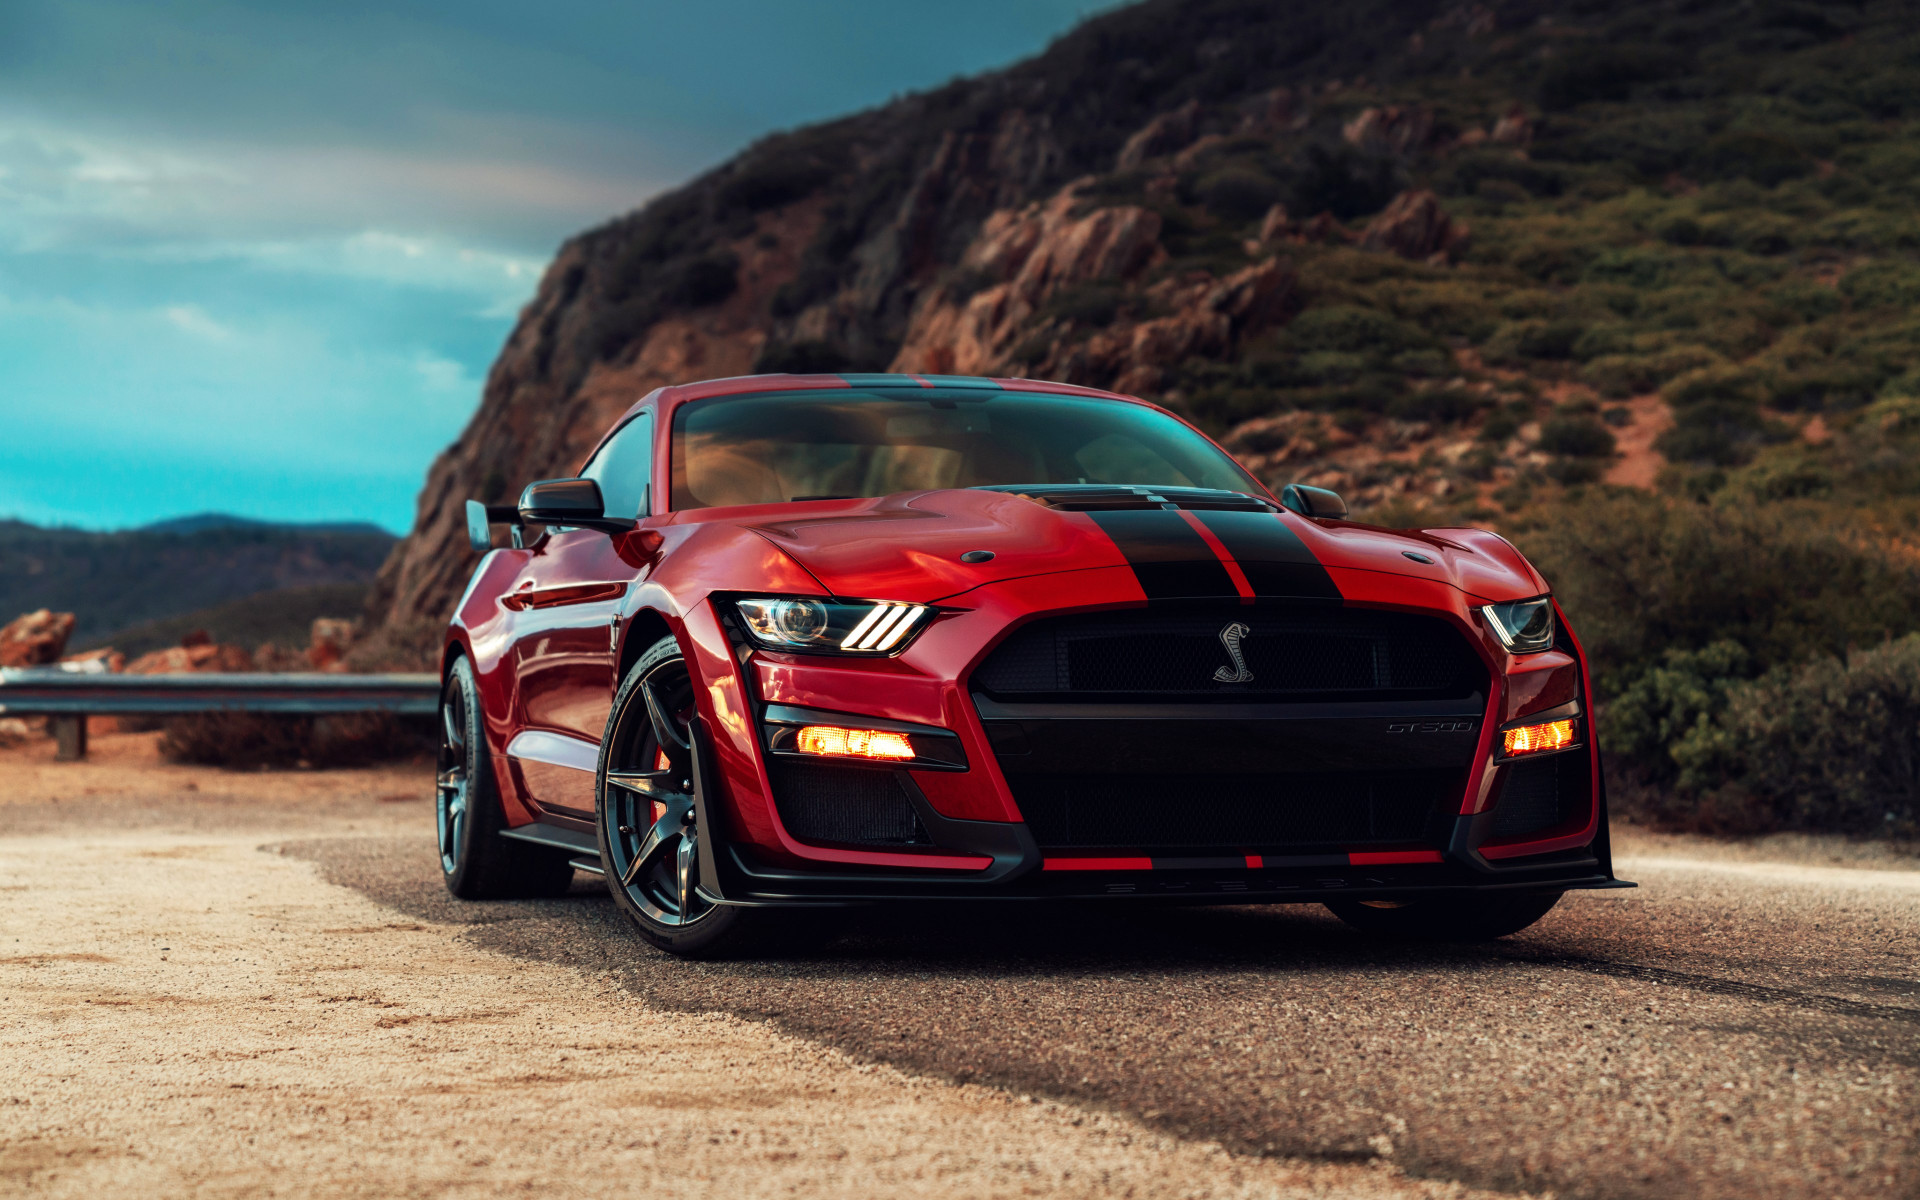 Ford Mustang Shelby GT500 wallpaper 1920x1200